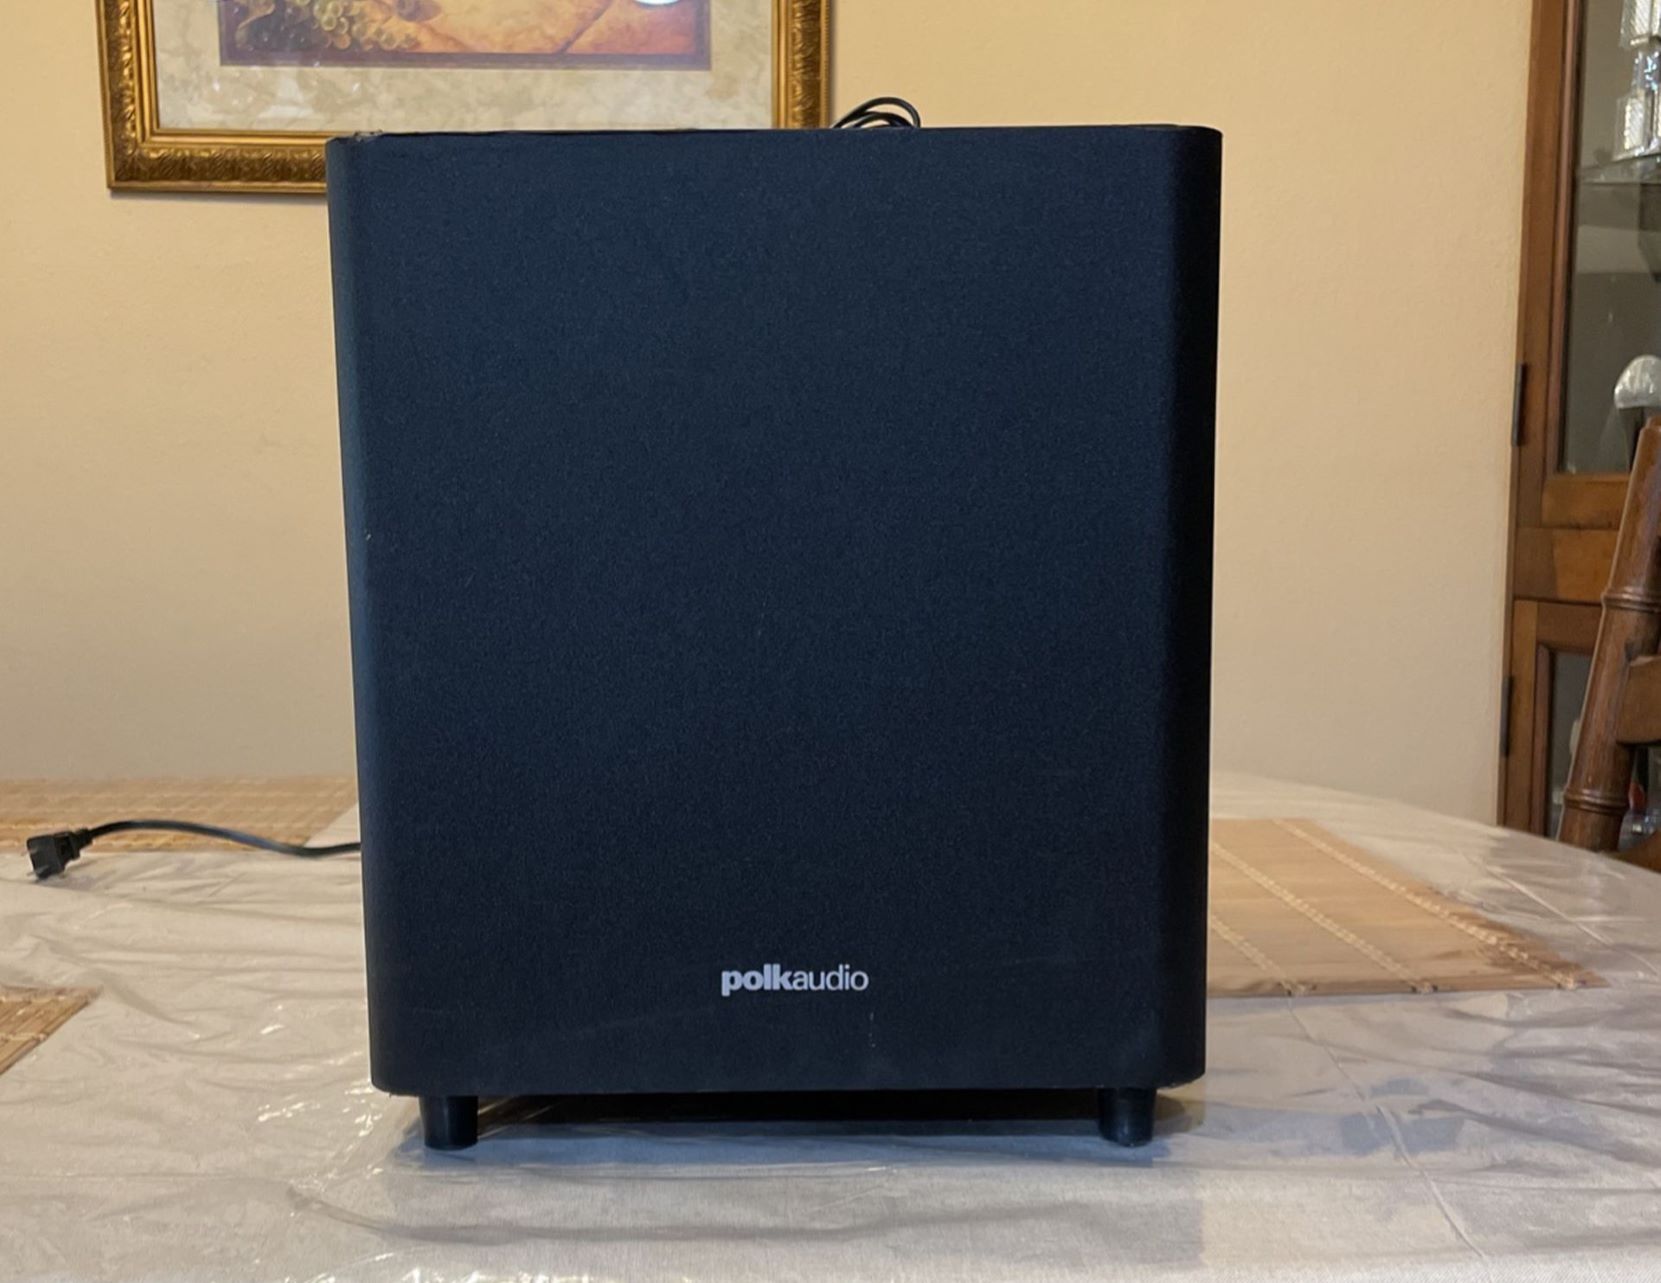 How To Connect A Polk Audio Subwoofer